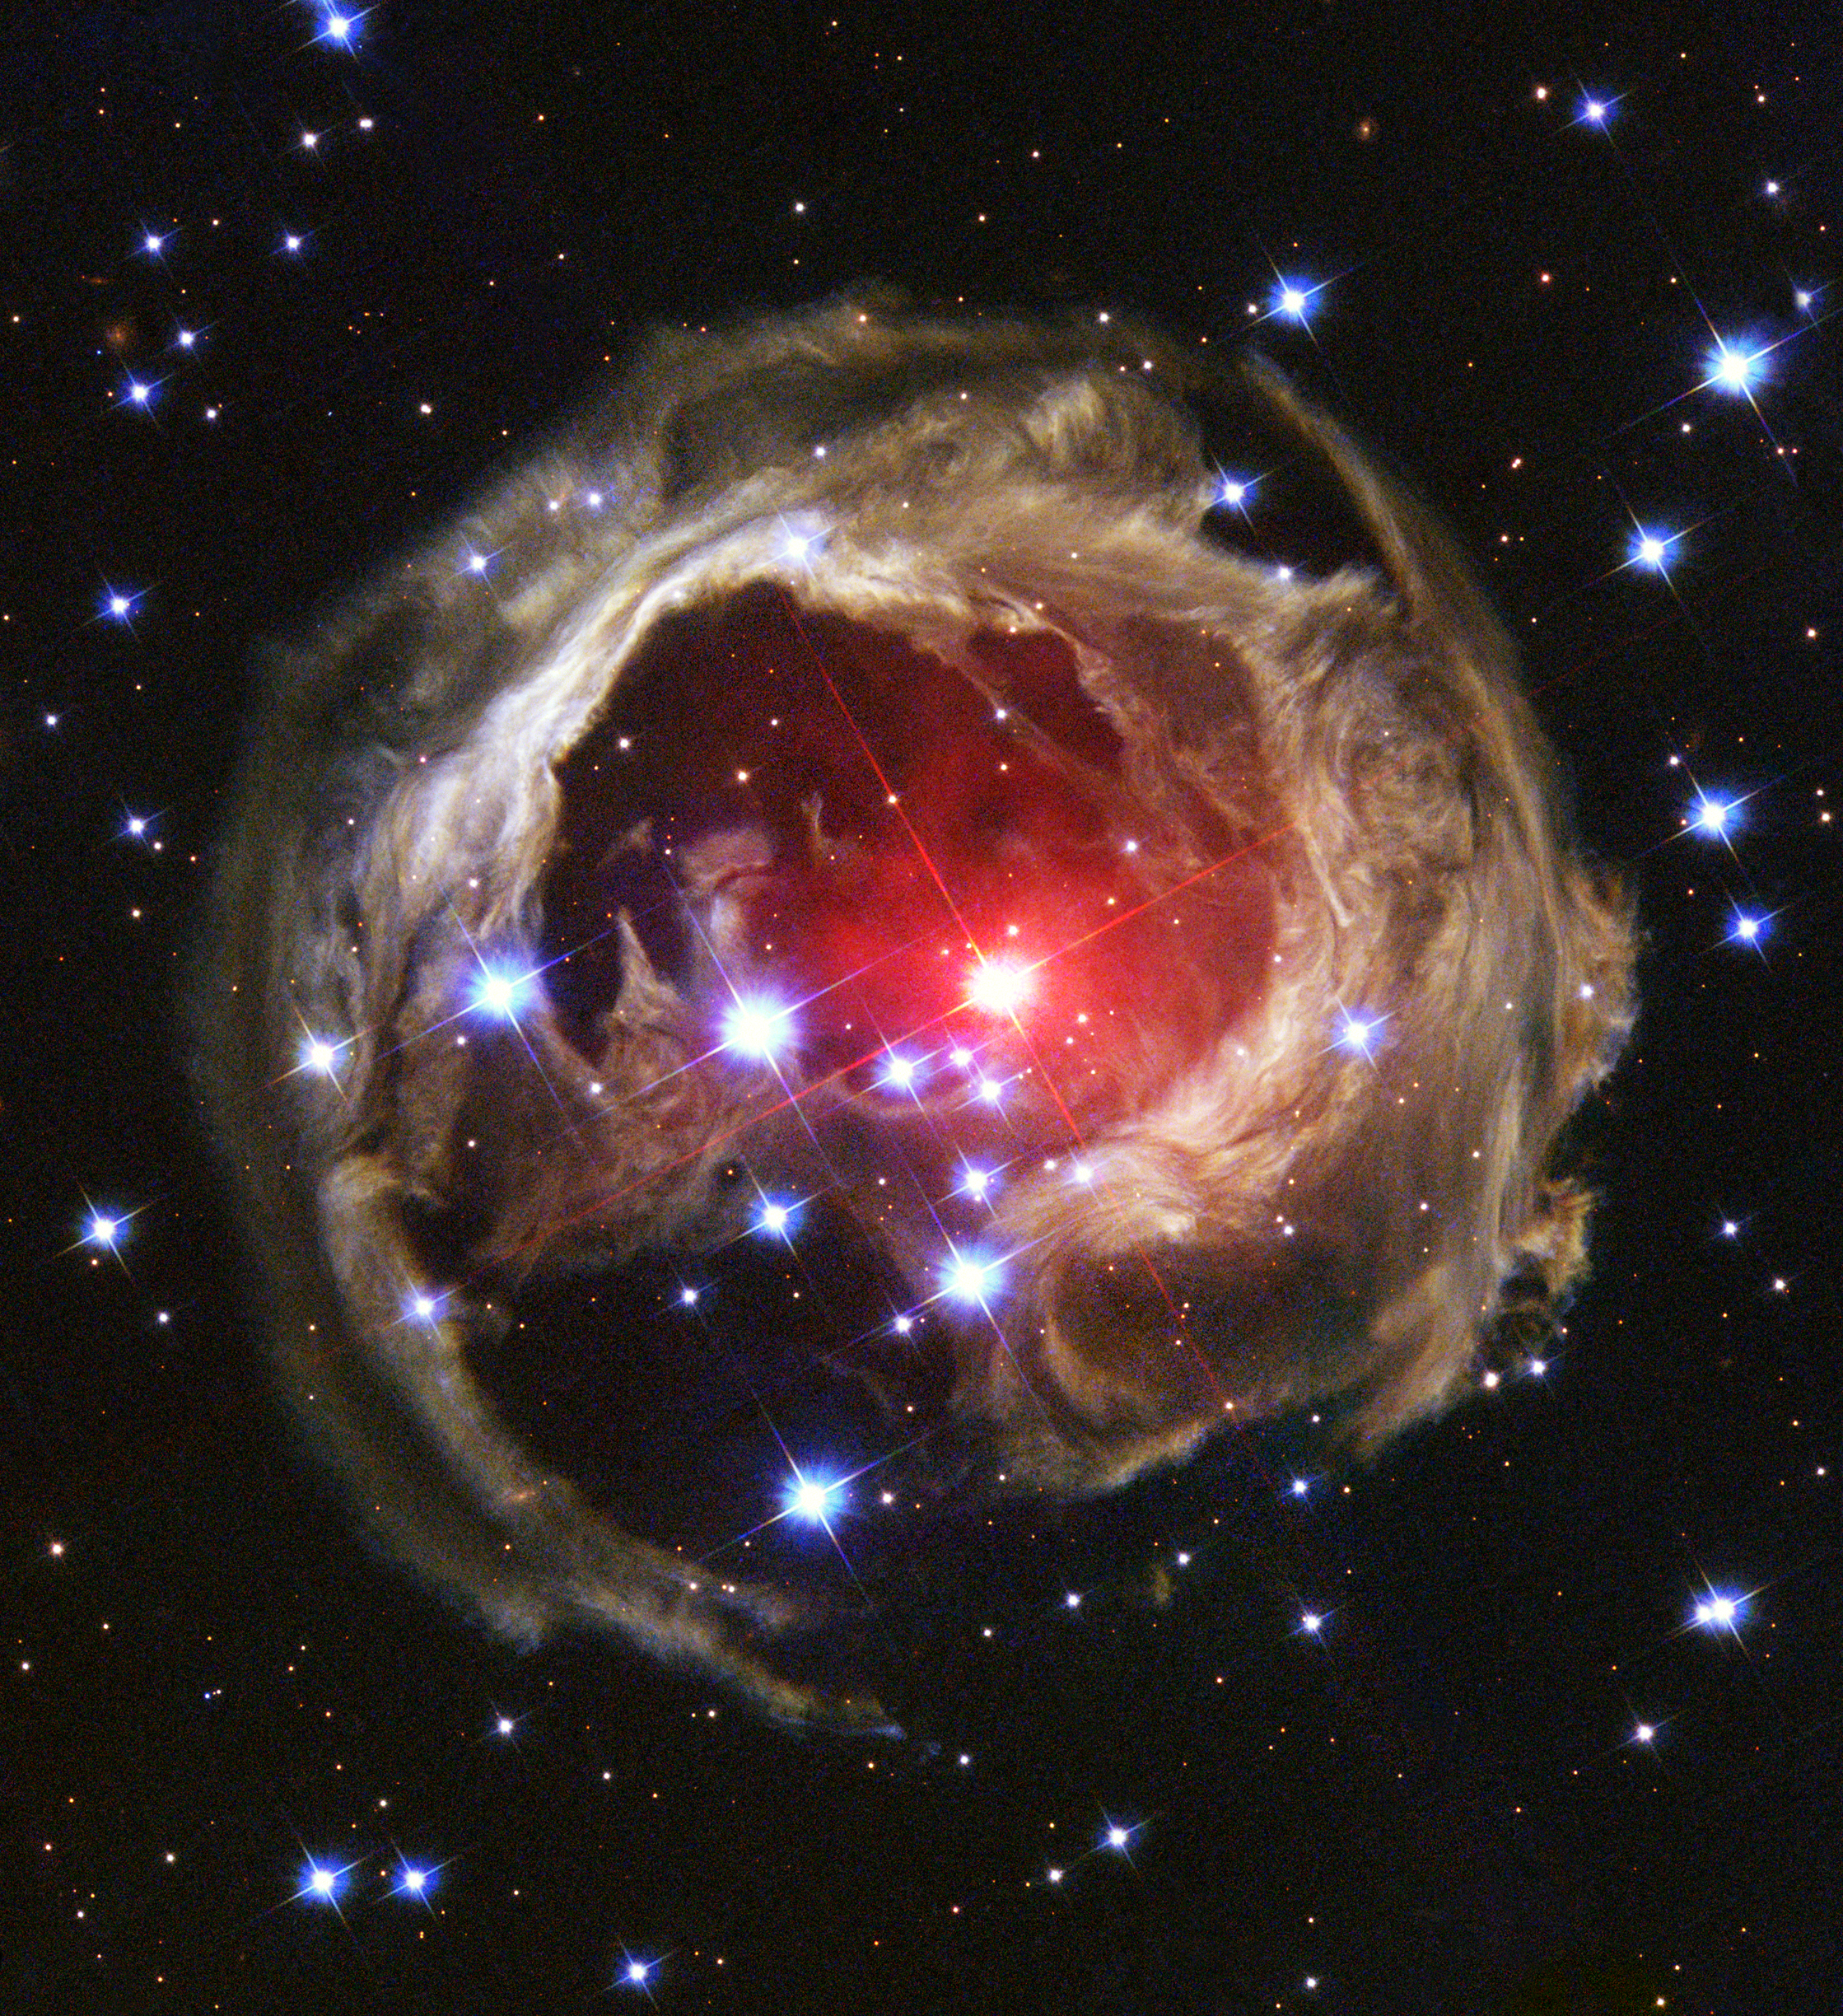 Large red star in the center of the image surrounded by brown dust and gas swirling around it unevenly.